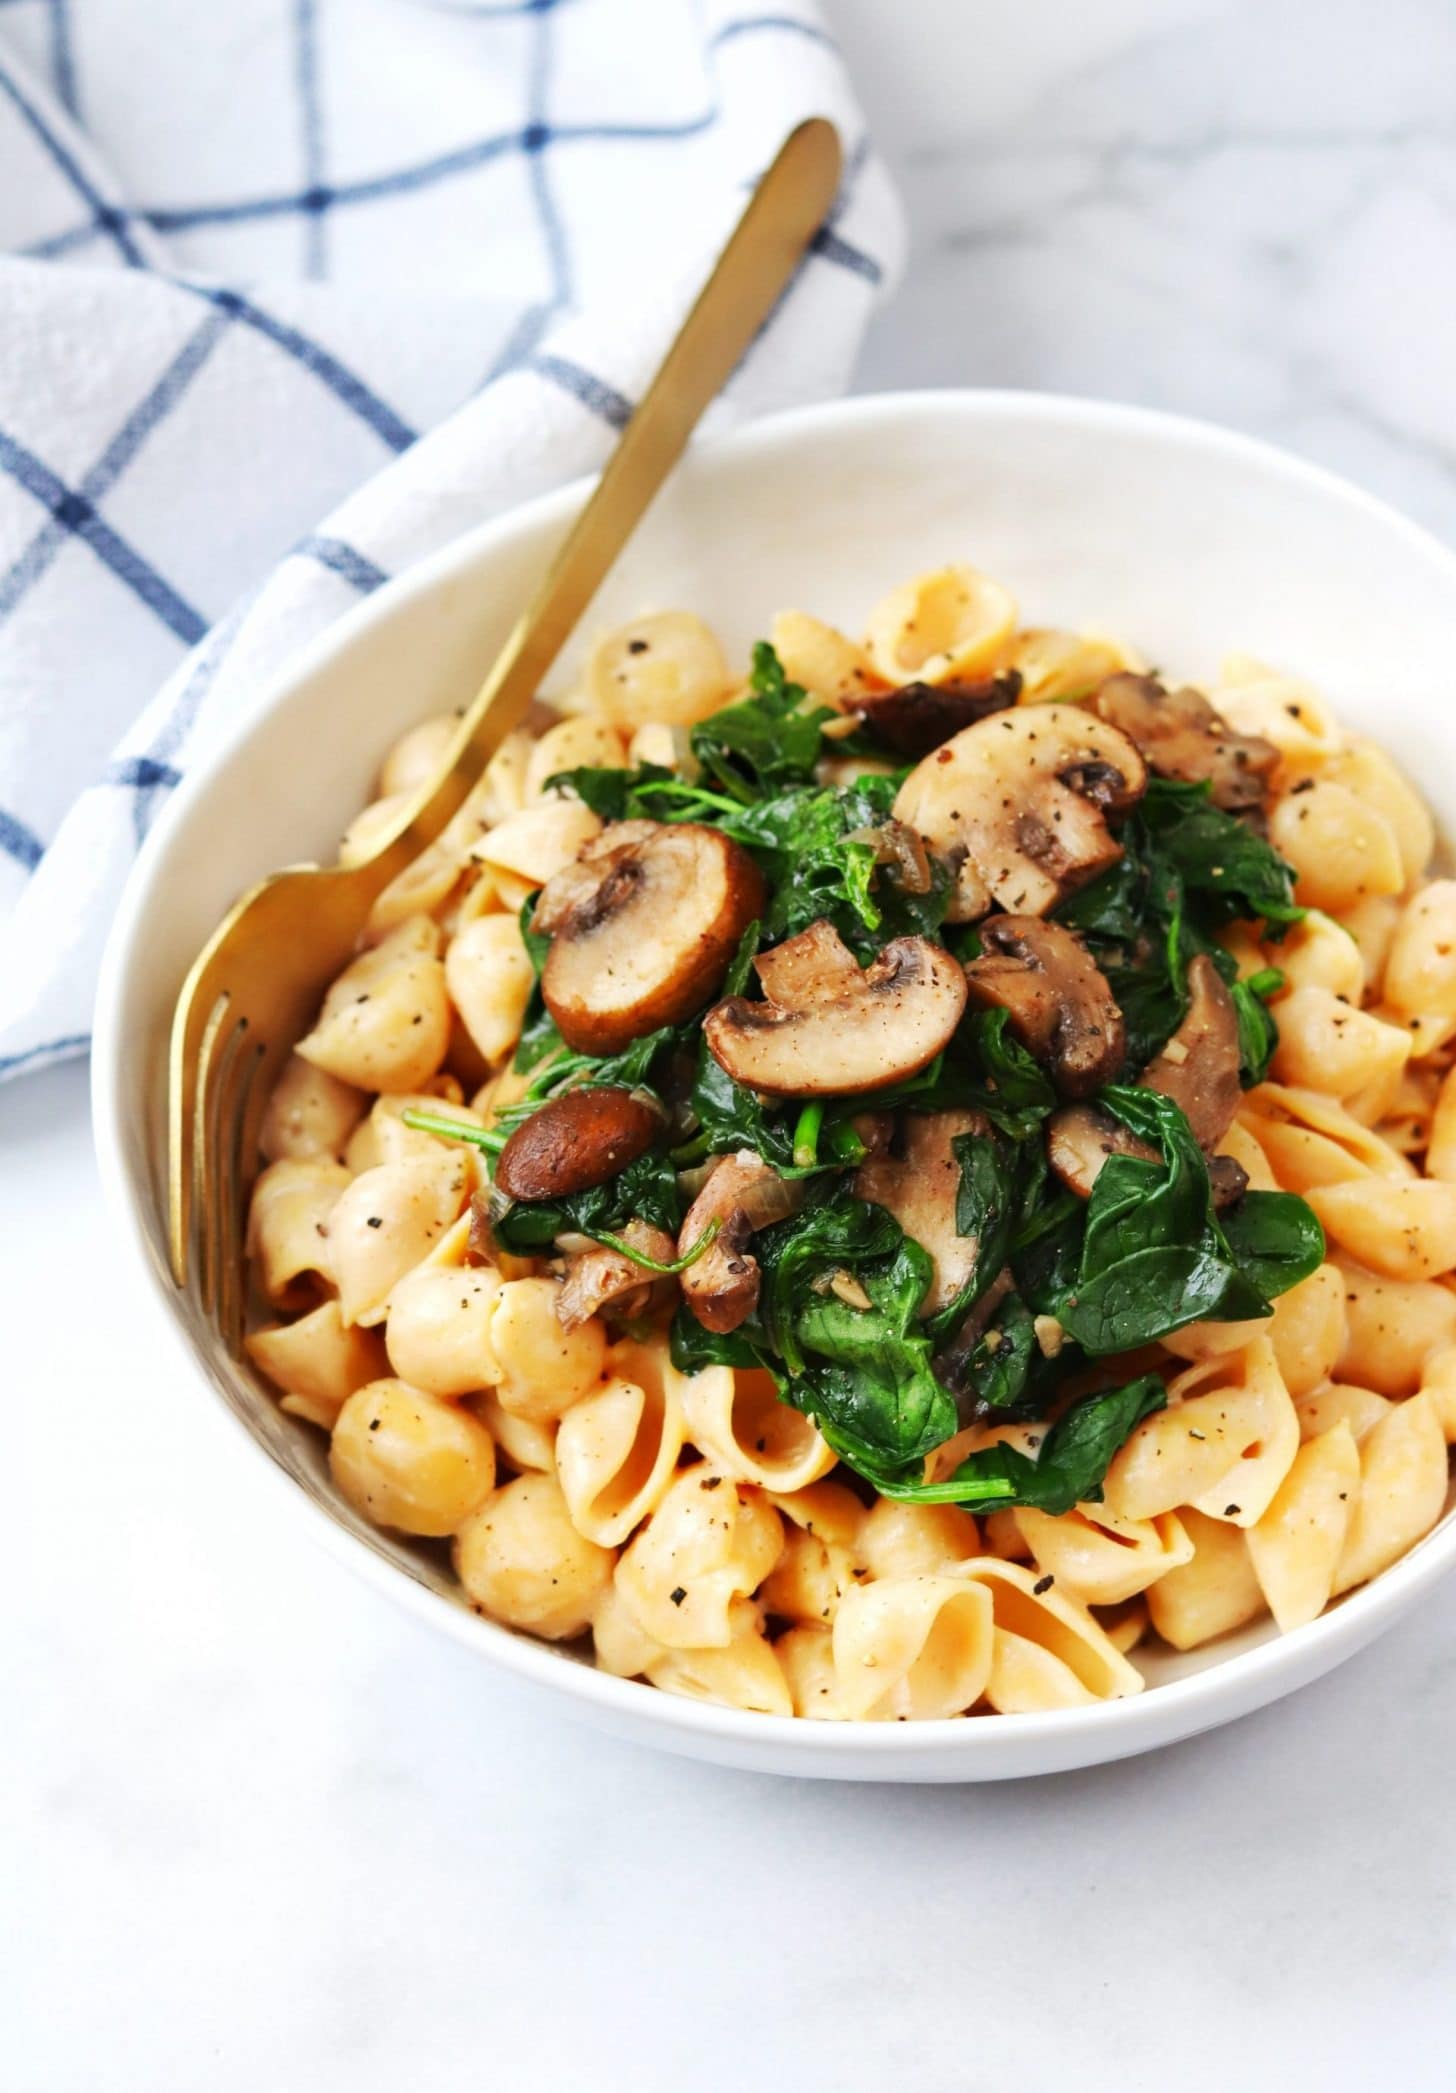 Bowl of Creamy High Protein Mushroom and Spinach Pasta